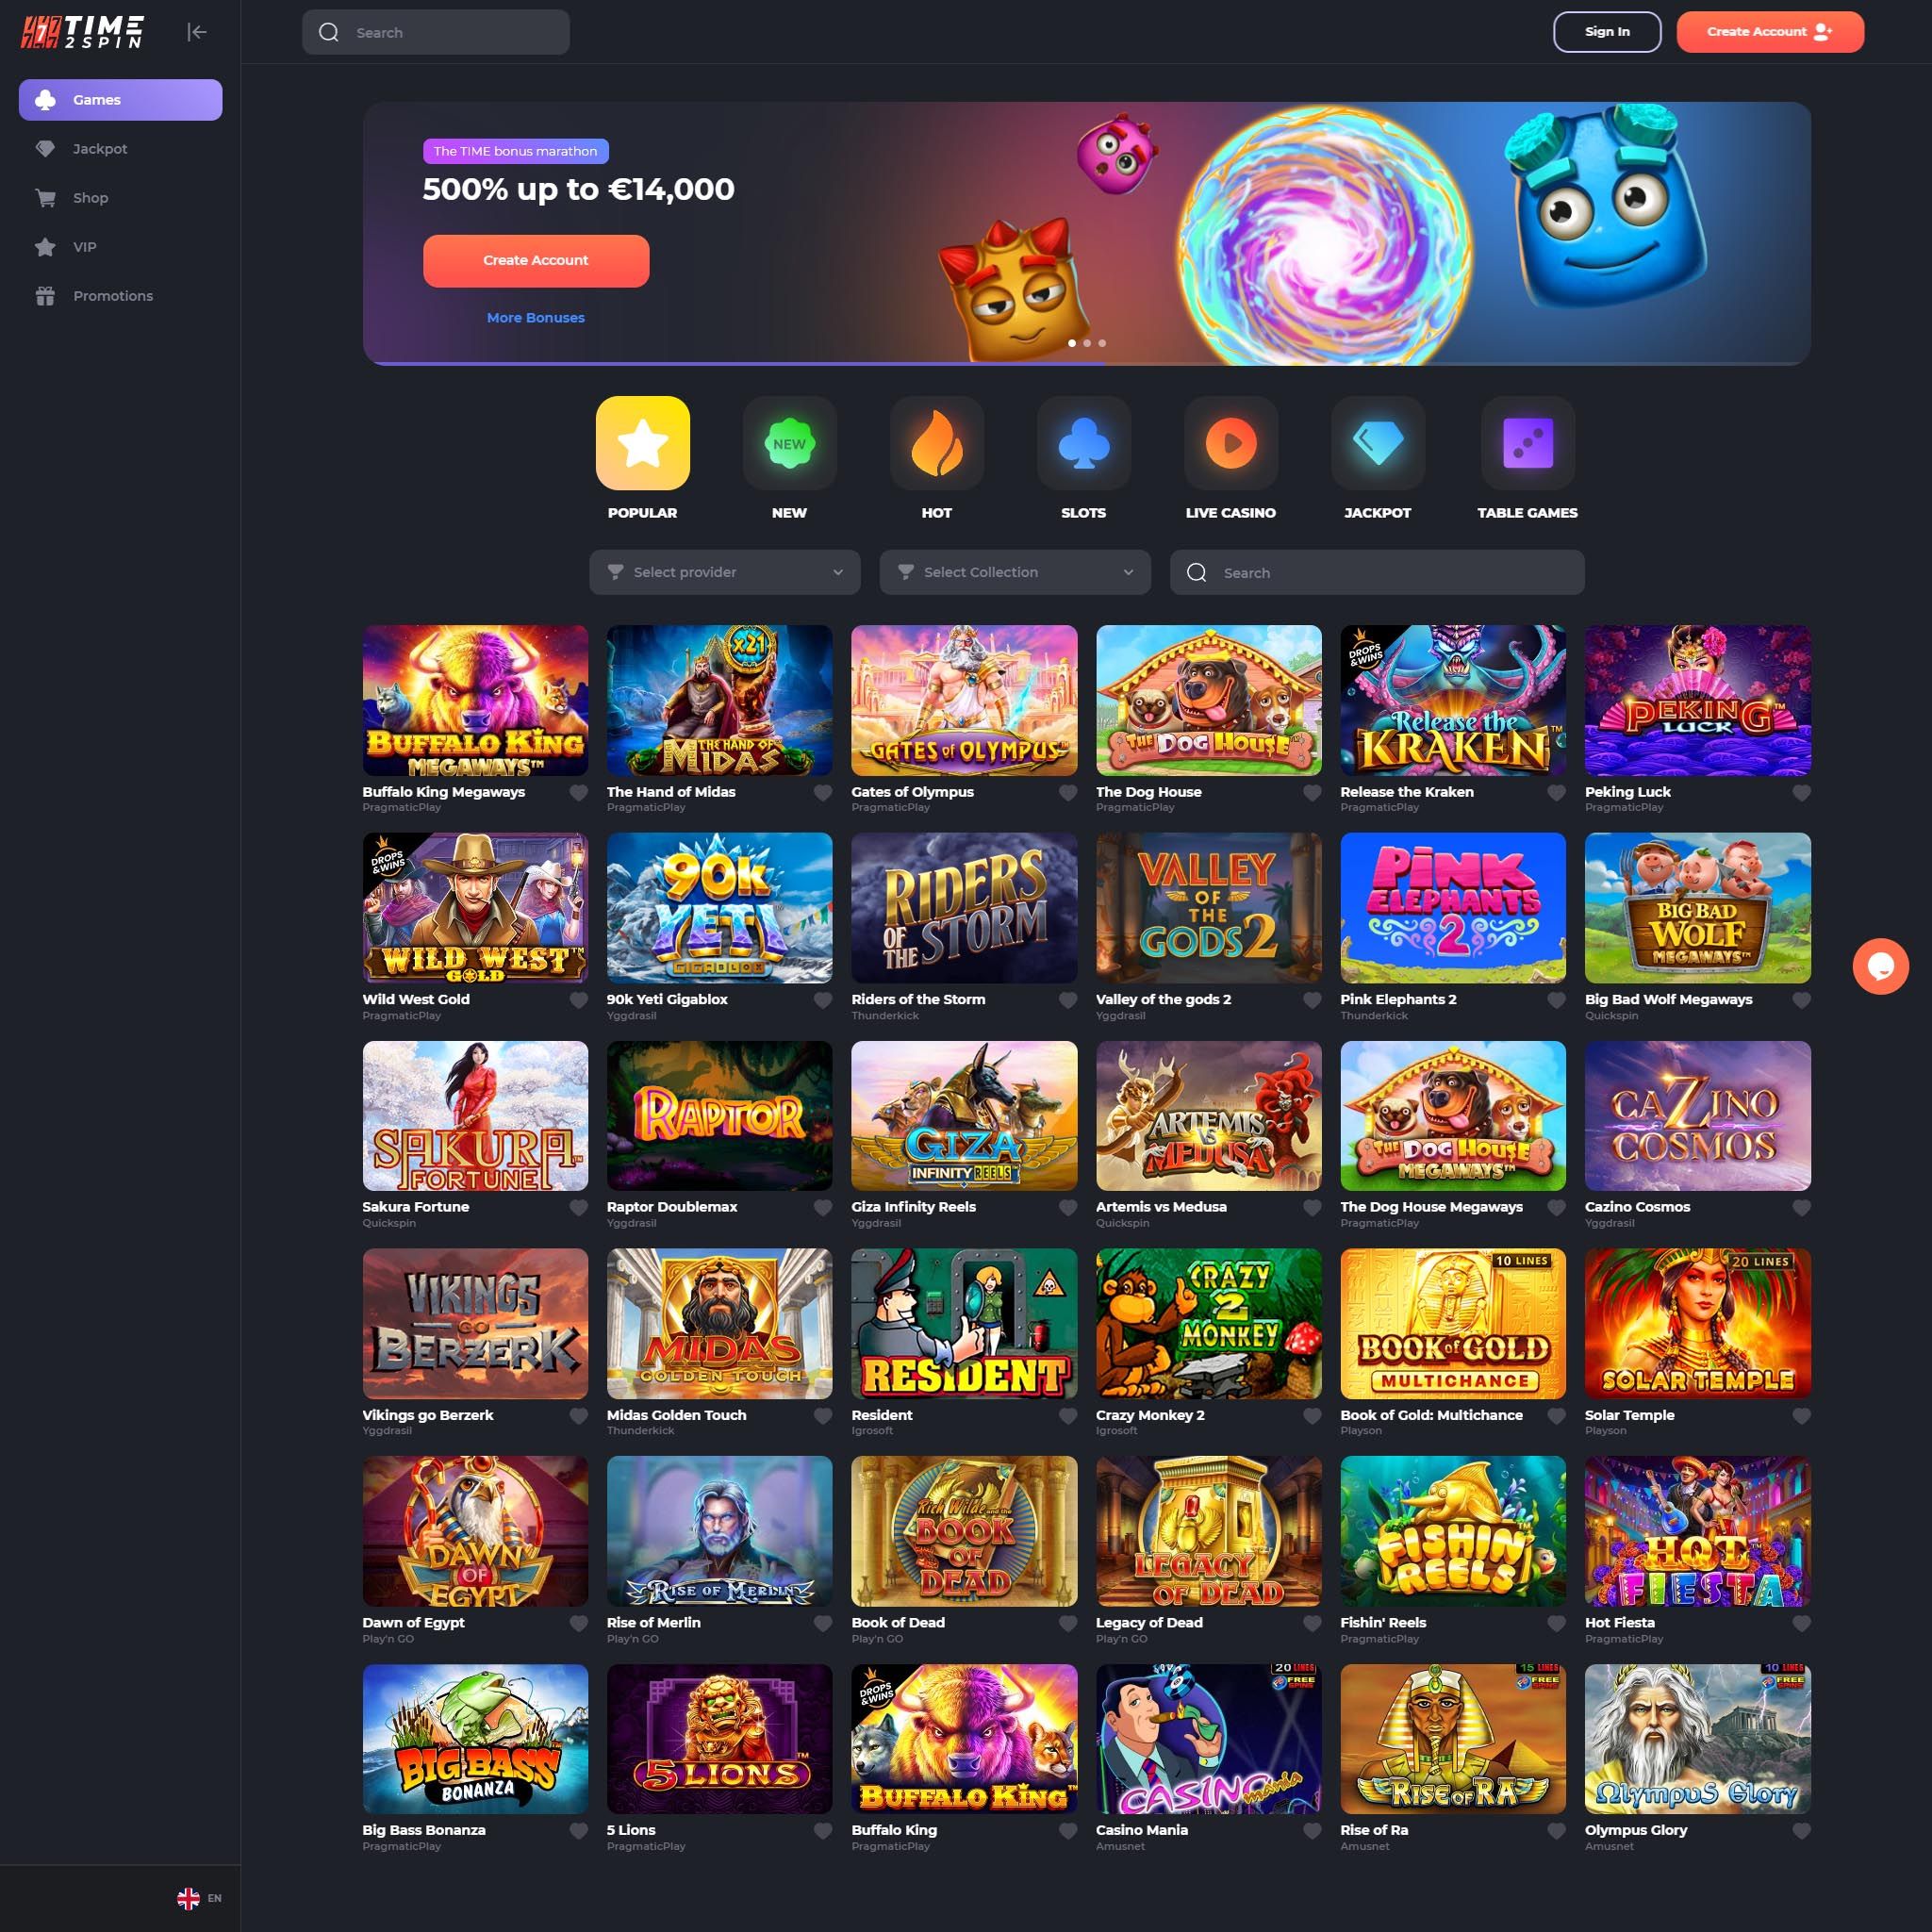 Time2spin Casino full games catalogue